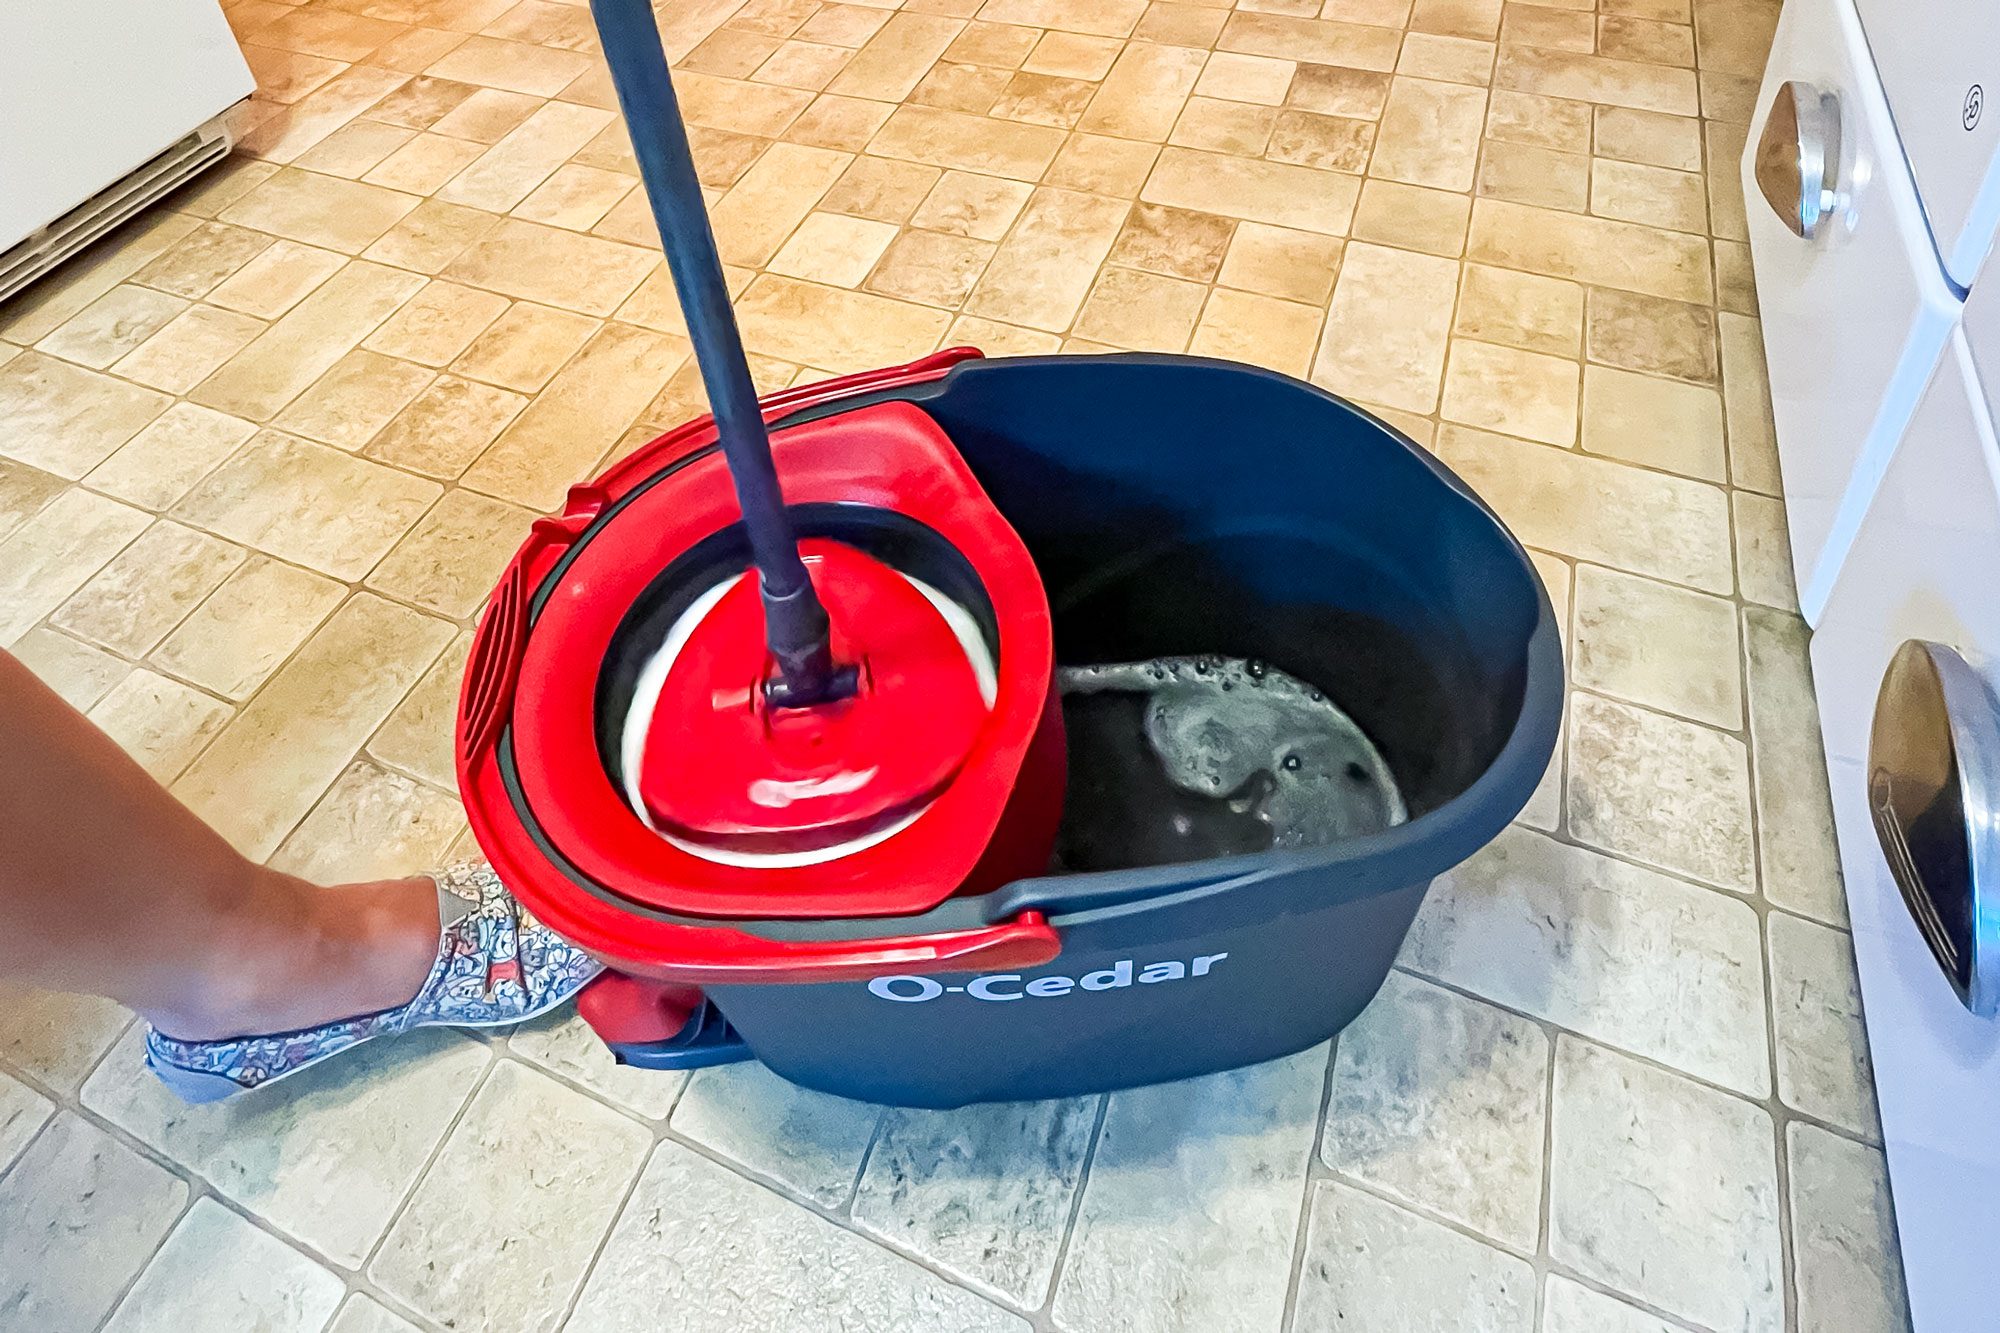 Review: We Tested the O-Cedar Spin Mop, a TikTok Cleaning Tool